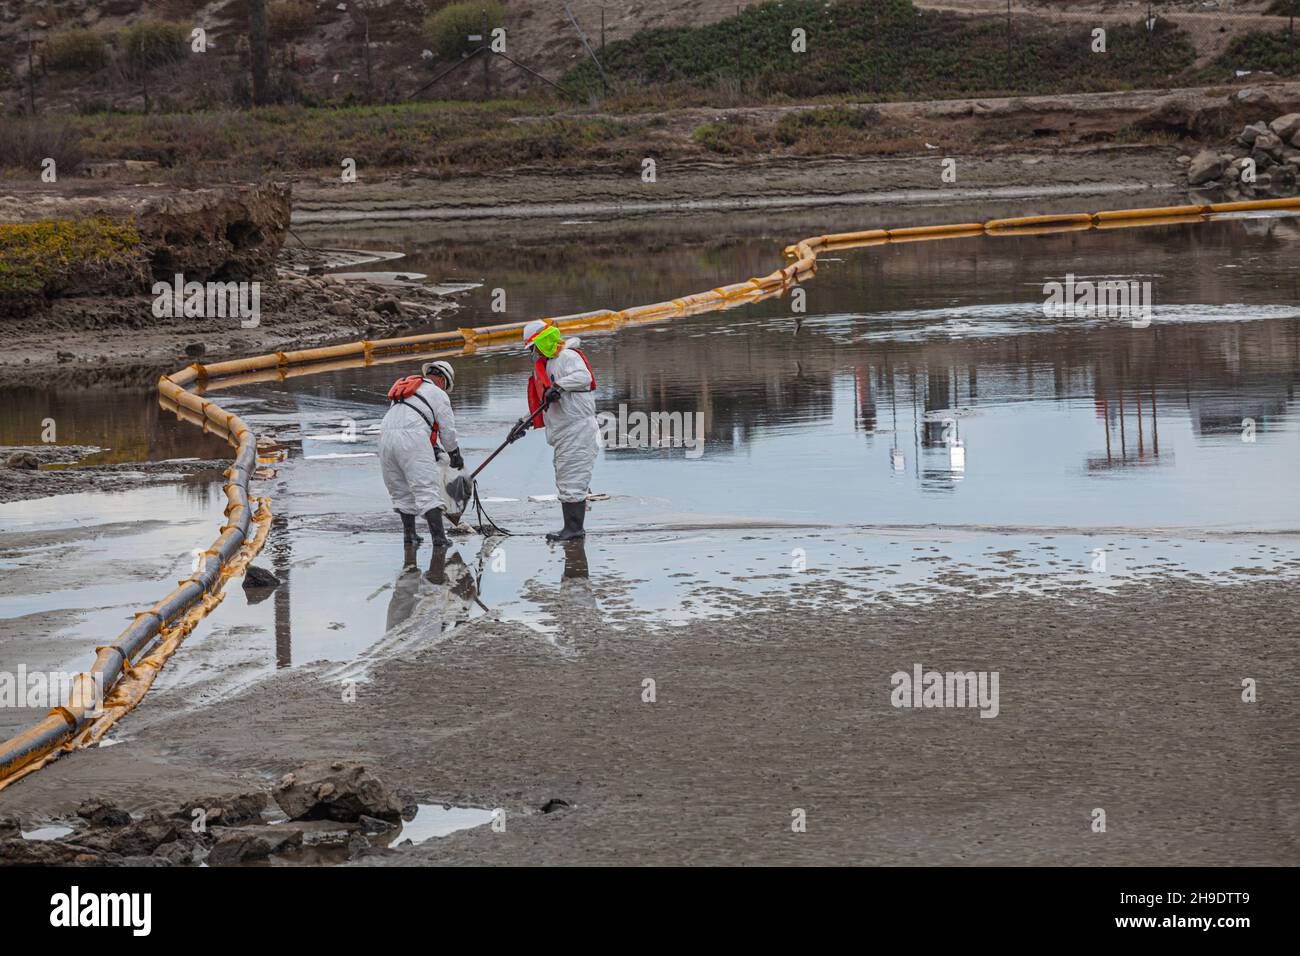 A cleanup crew mops up oil in the Talbert Marsh, home to many birds and wildlife. An estimated 127,000 gallons of crude oil leaked from an oil derrick Stock Photo